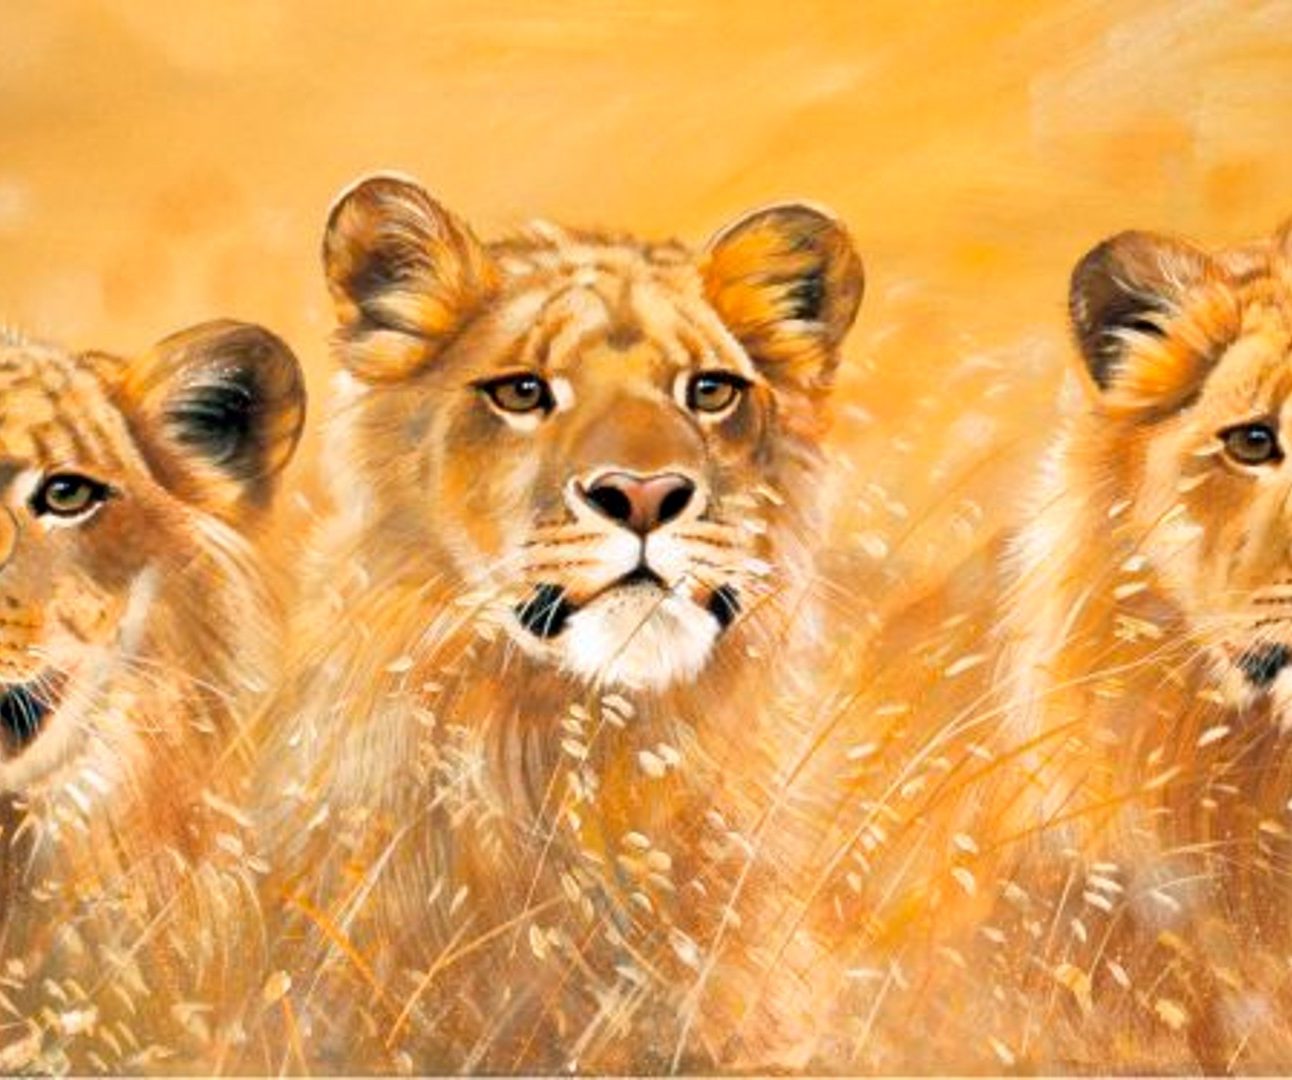 A painting showing three lionesses peeking out from behind long grass